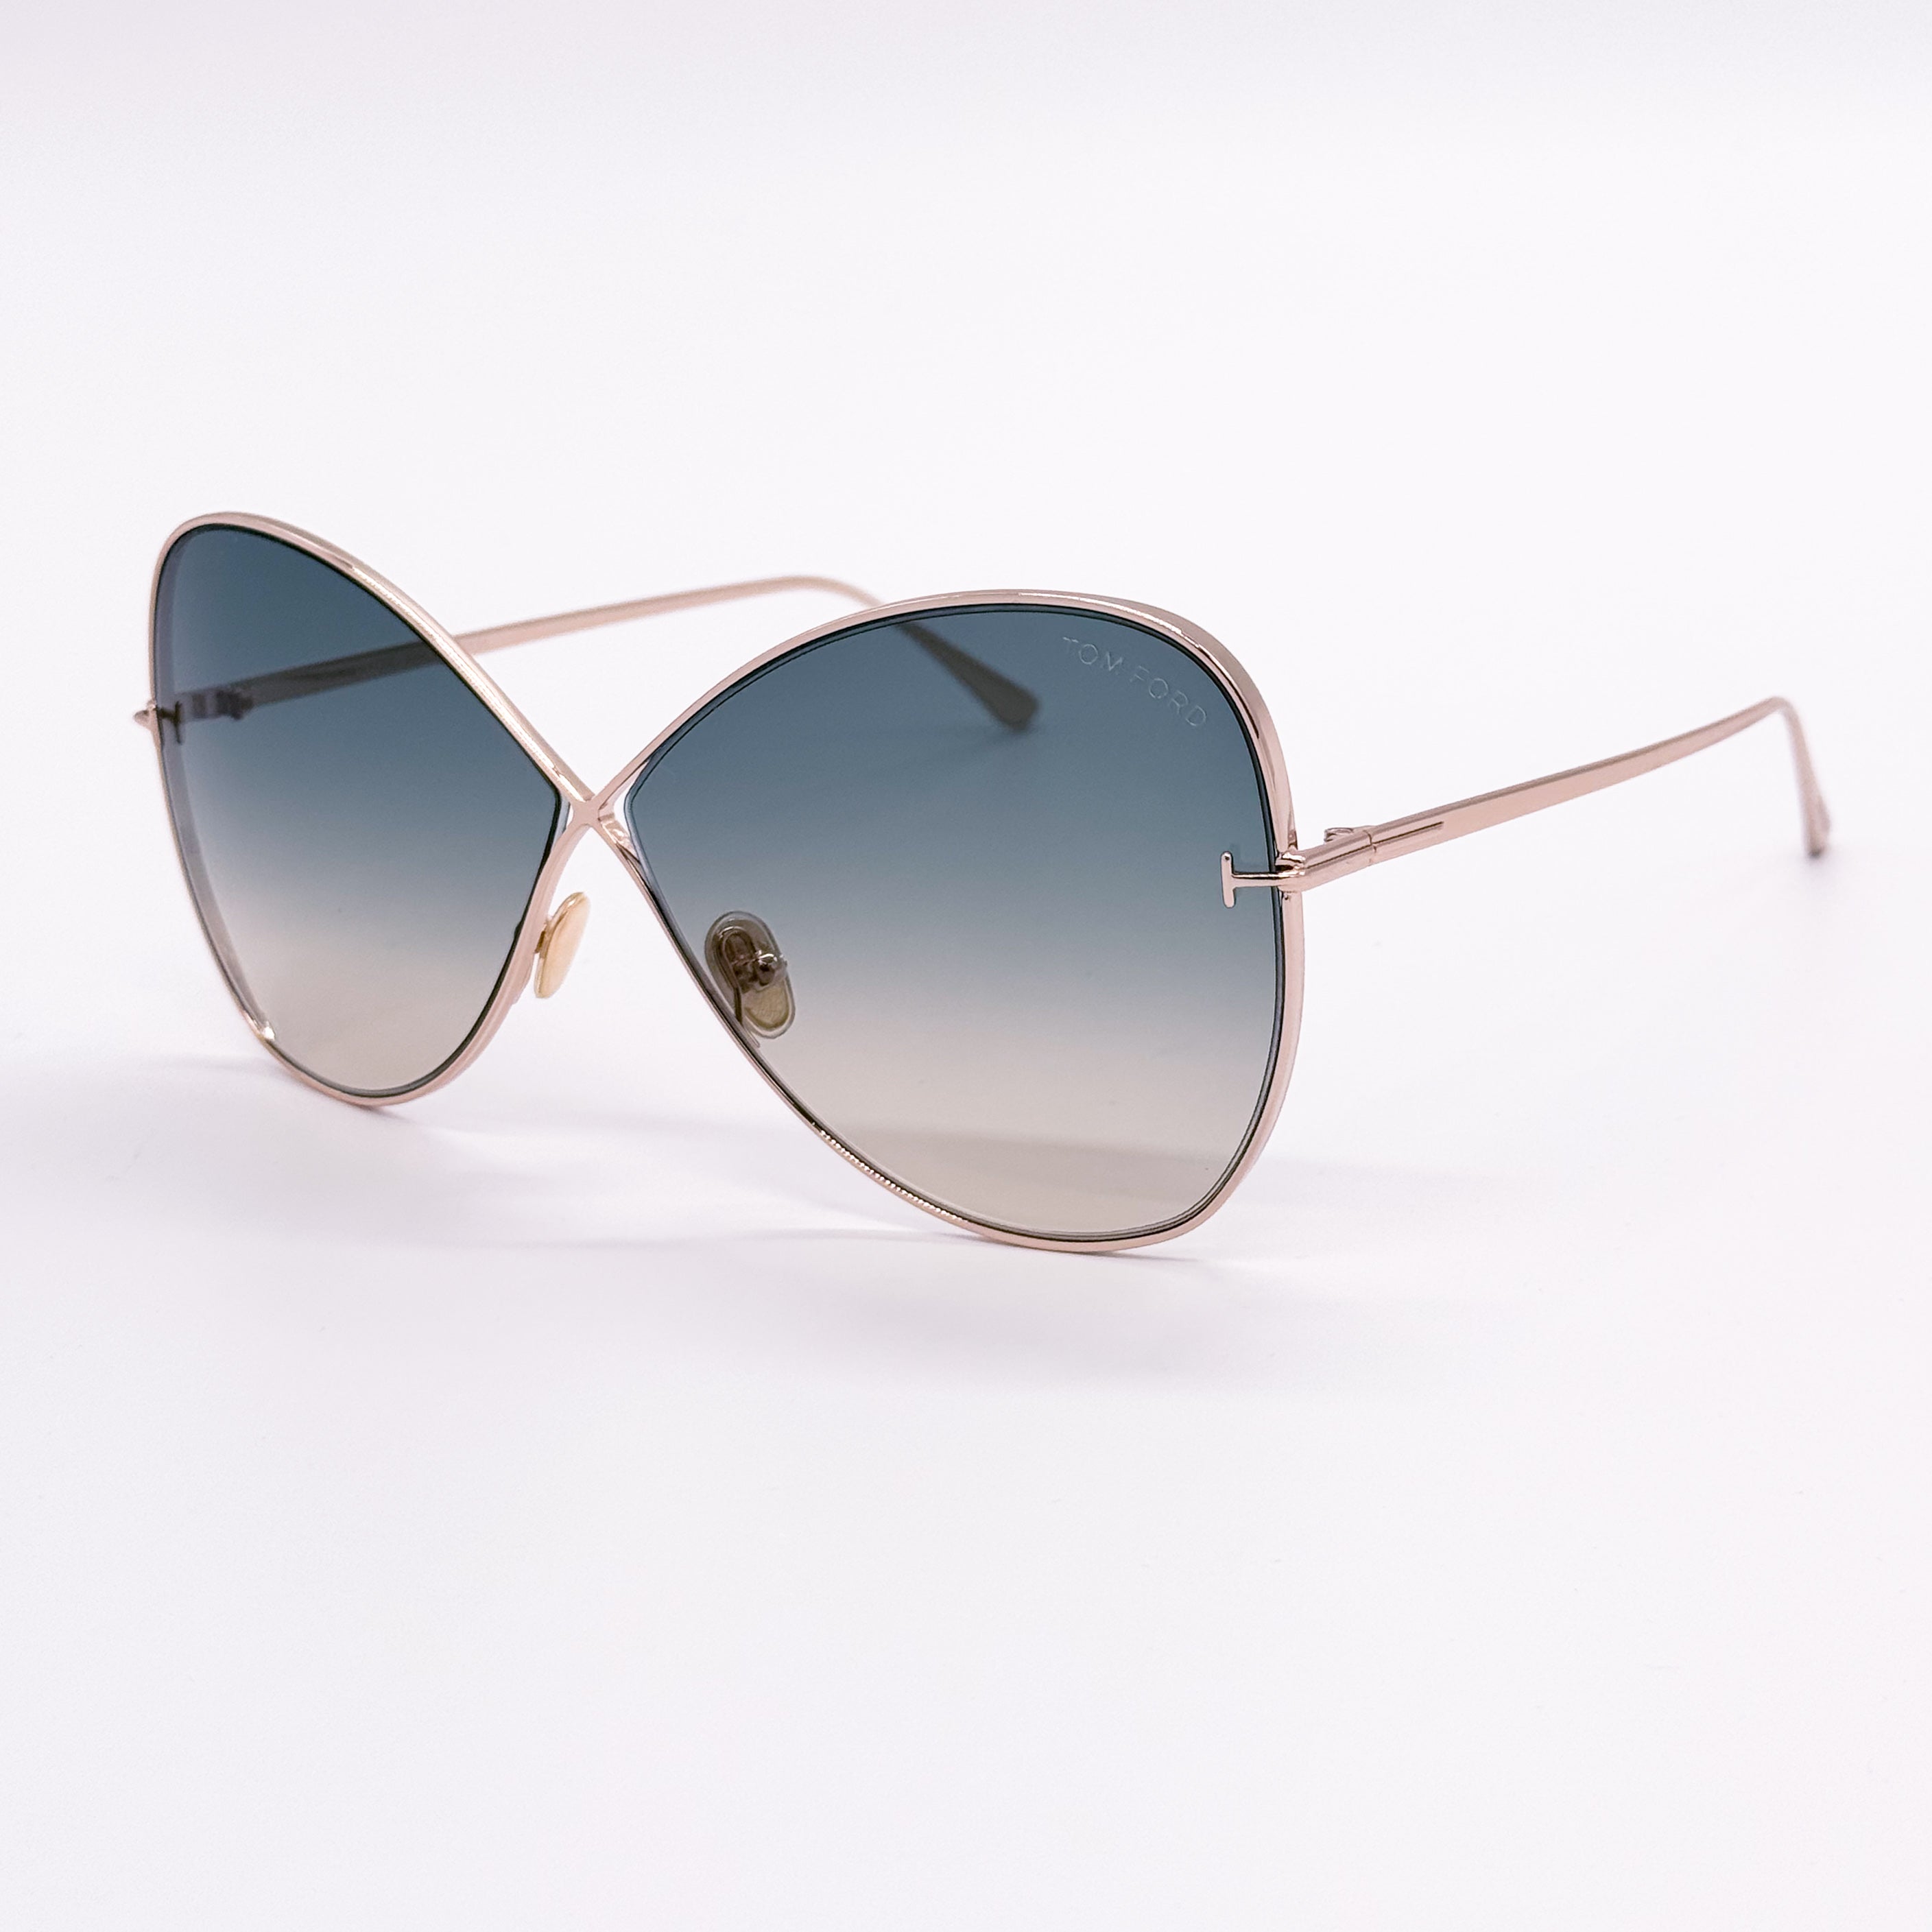 TOM FORD NICKIE TF842 28P SUNGLASSES FT0842/S